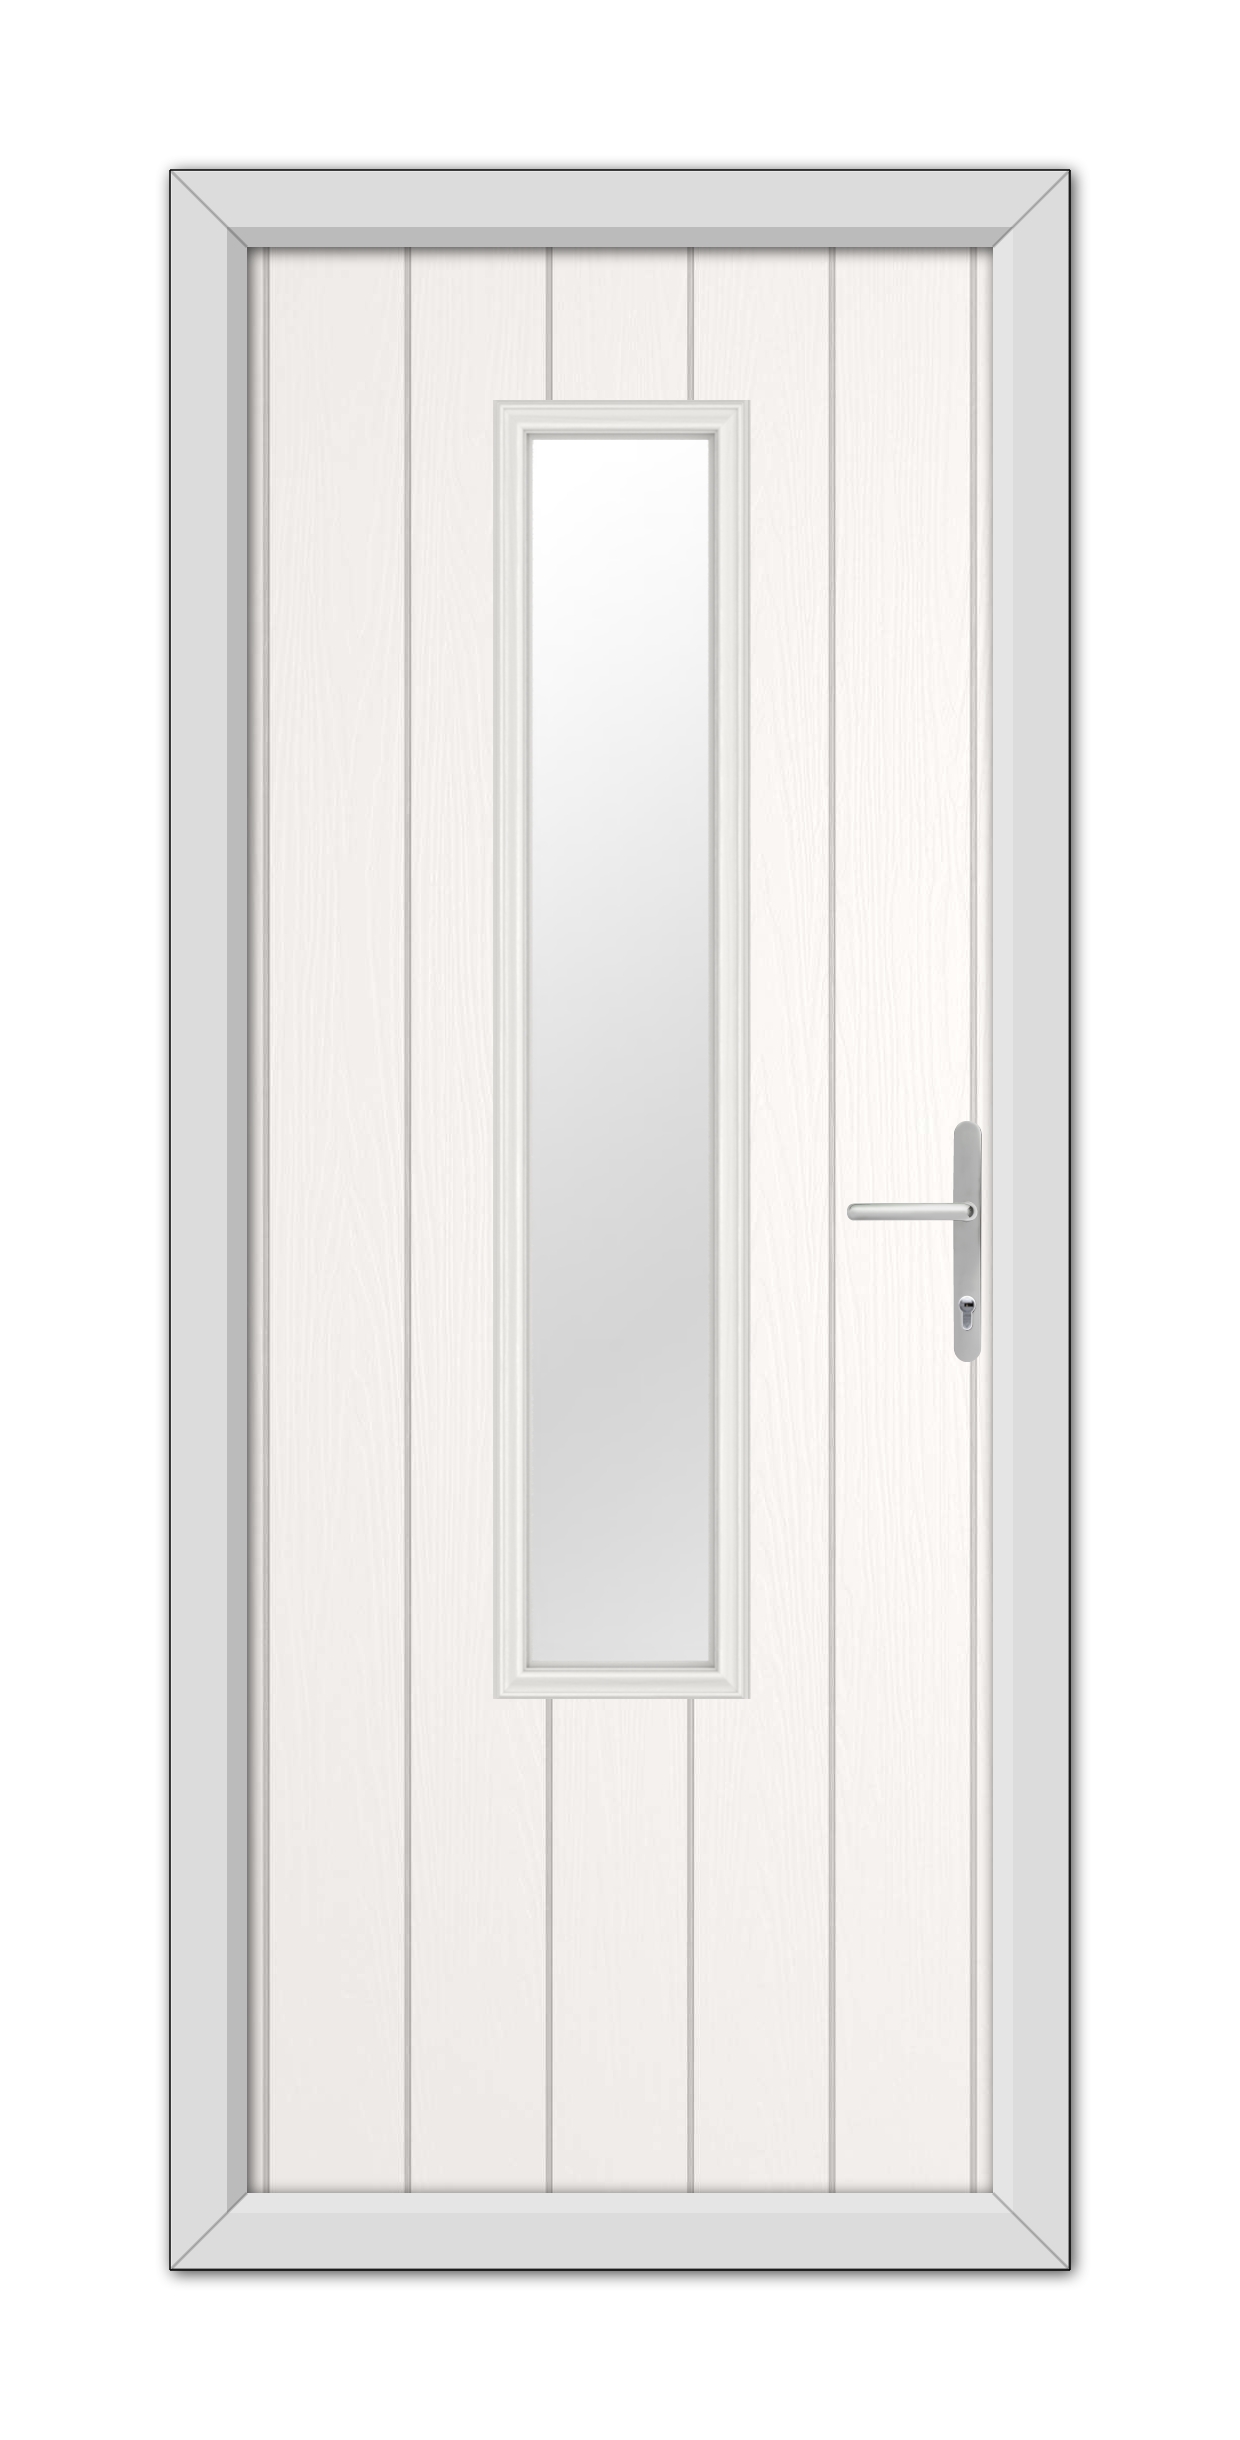 A White Abercorn Composite Door 48mm Timber Core with a vertical glass panel and a modern handle, set within a simple frame, viewed frontally.